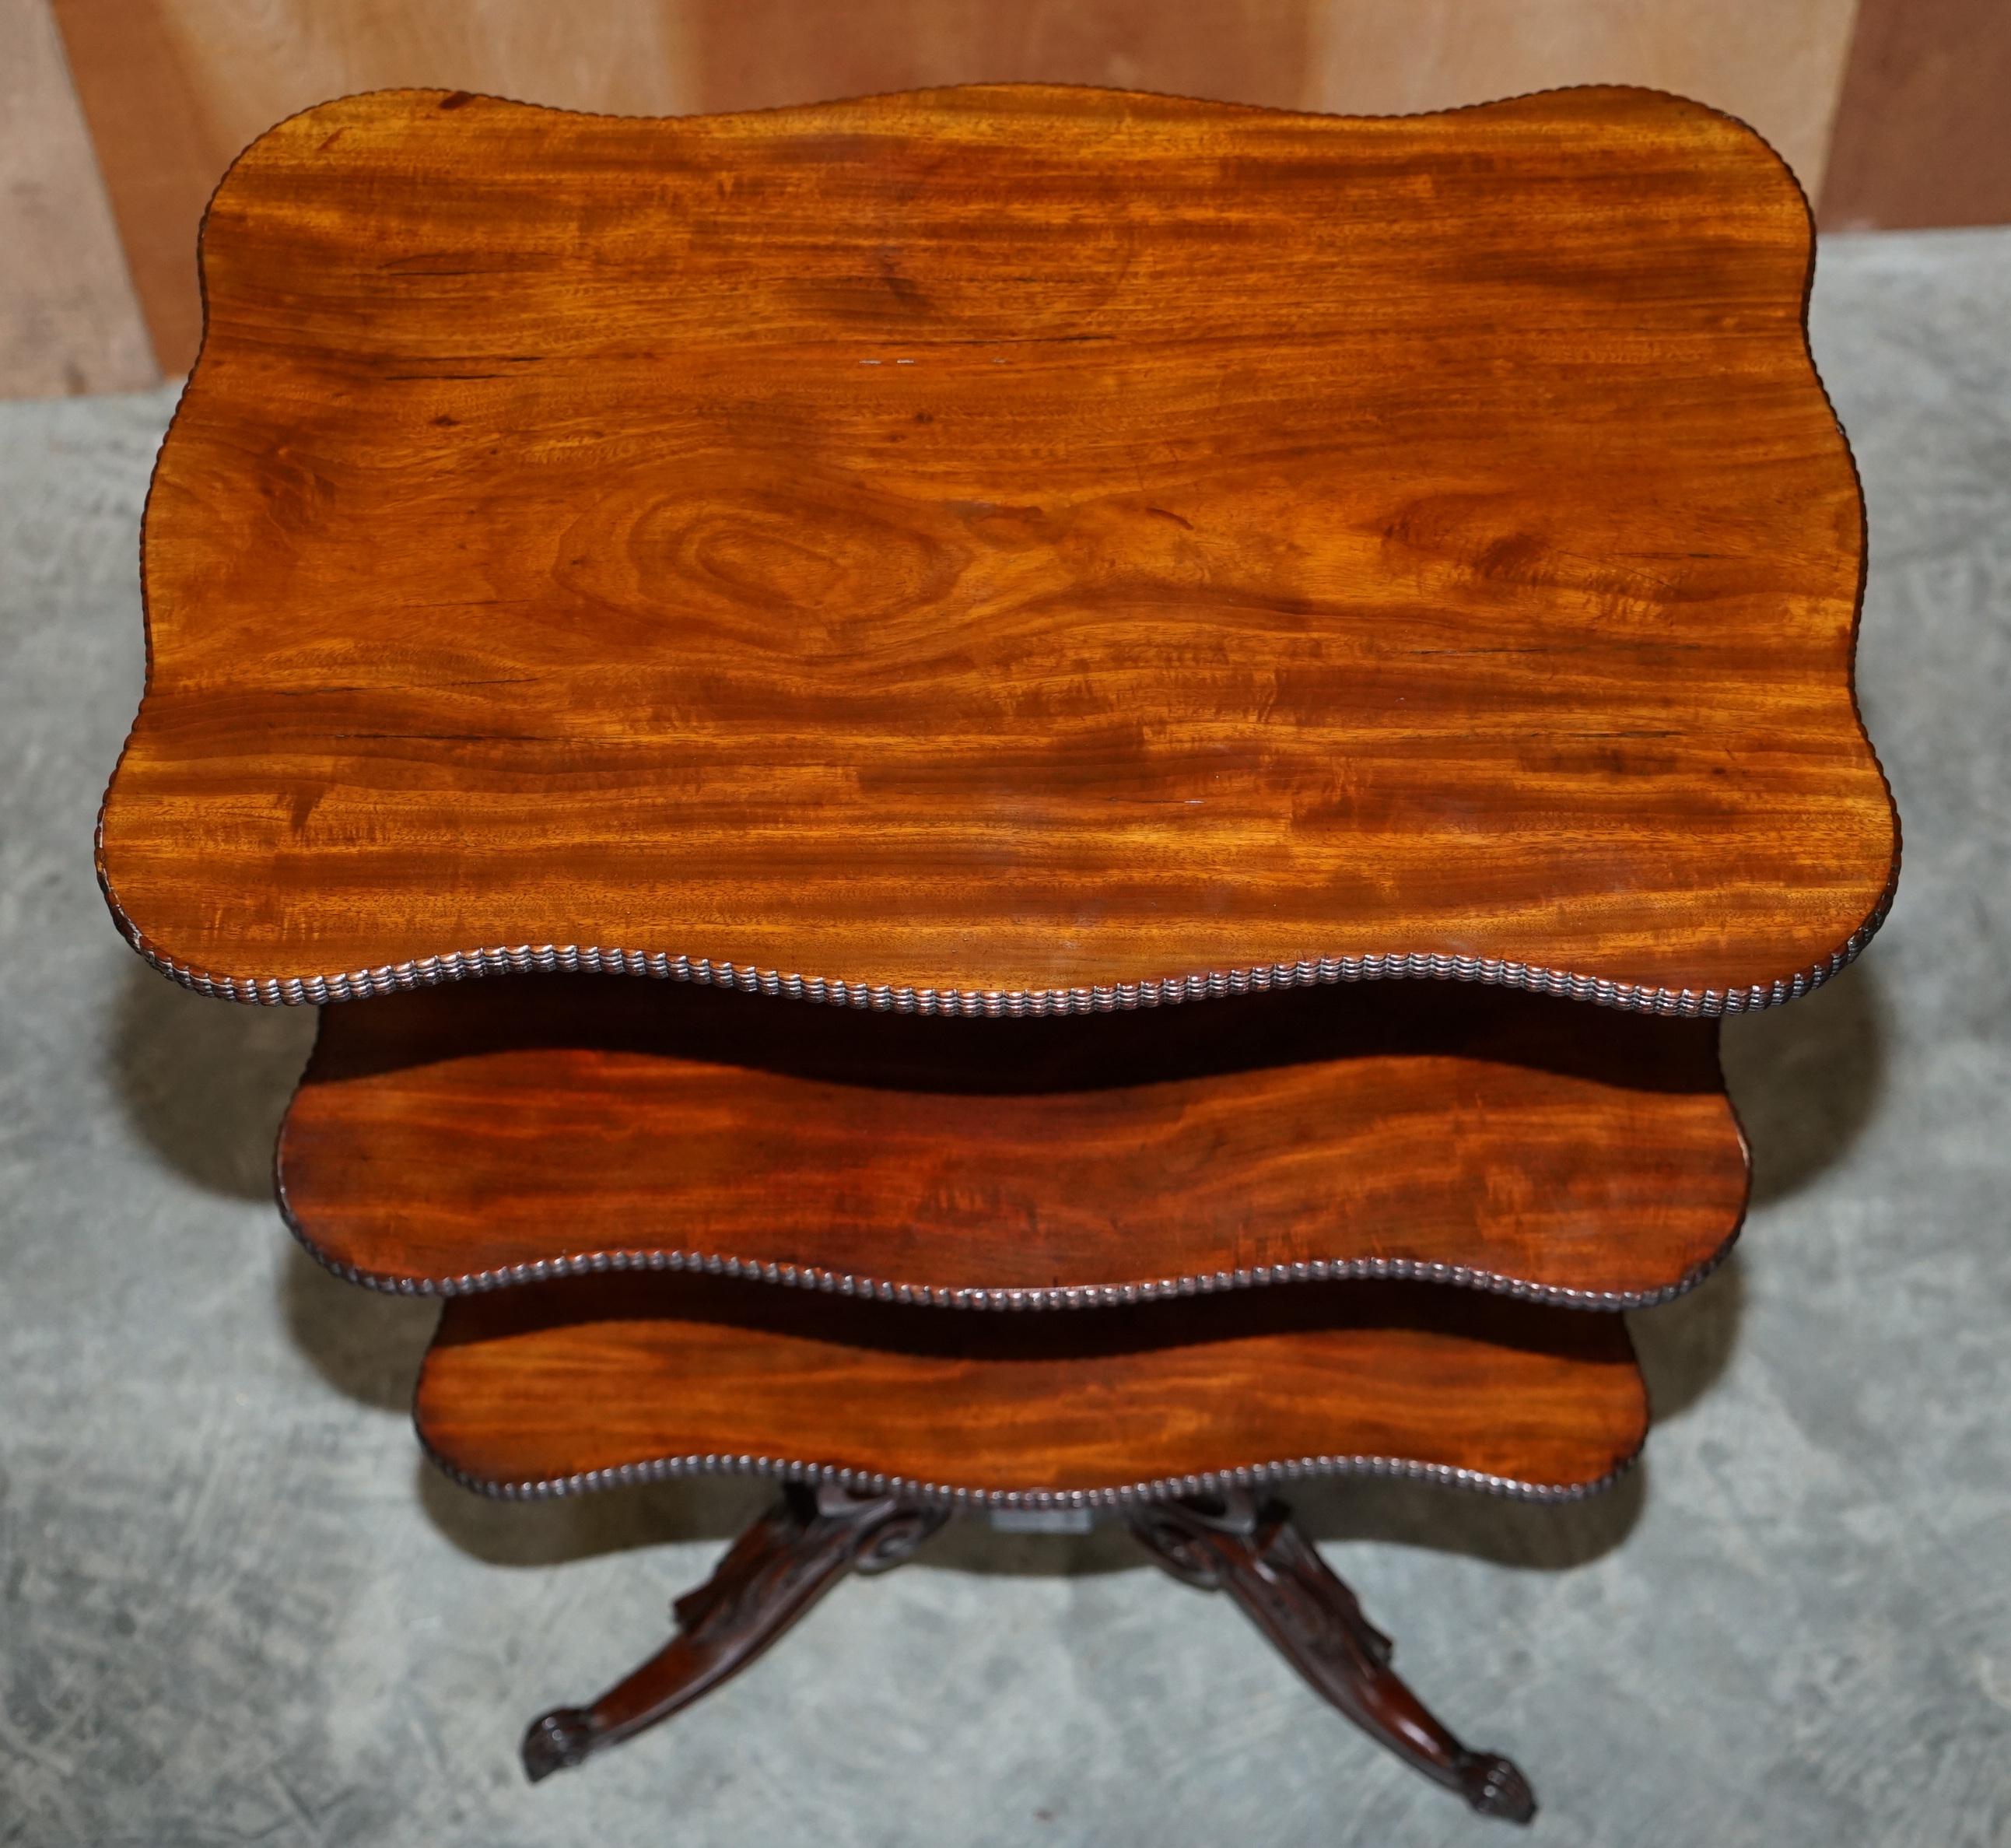 Restored Antique Gillows Cuban Hardwood Dumb Waiter Metamorphic Occasional Table For Sale 3